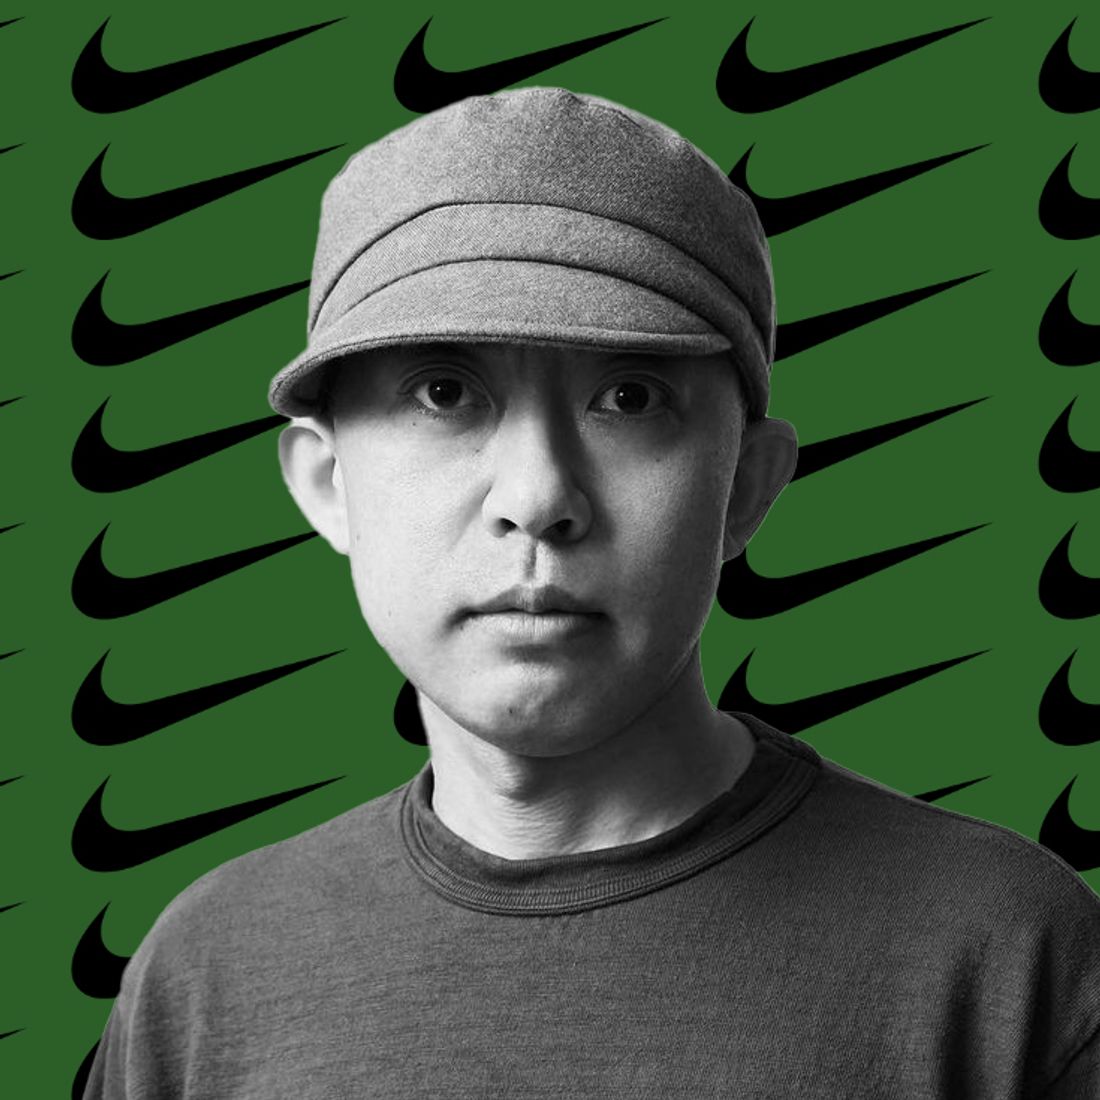 Did Nigo Just Drop the Hottest Sneakers?